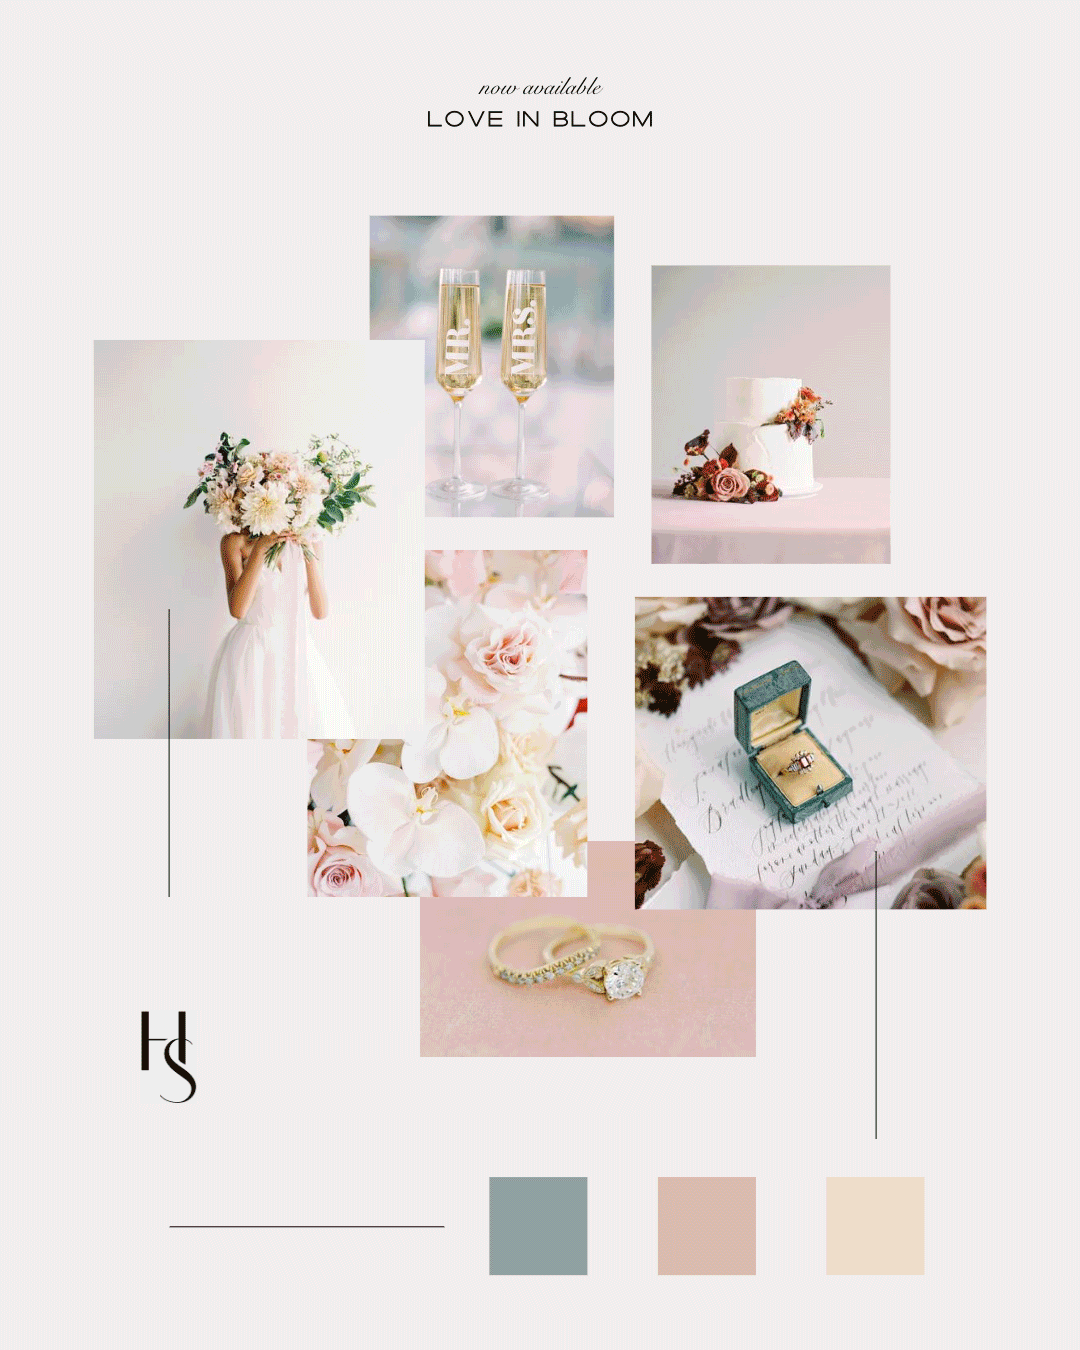 Mood board of floral arrangements in red & pink and wedding images in soft color palette, part of the latest Haute Stock 'Love in Bloom' collection. 